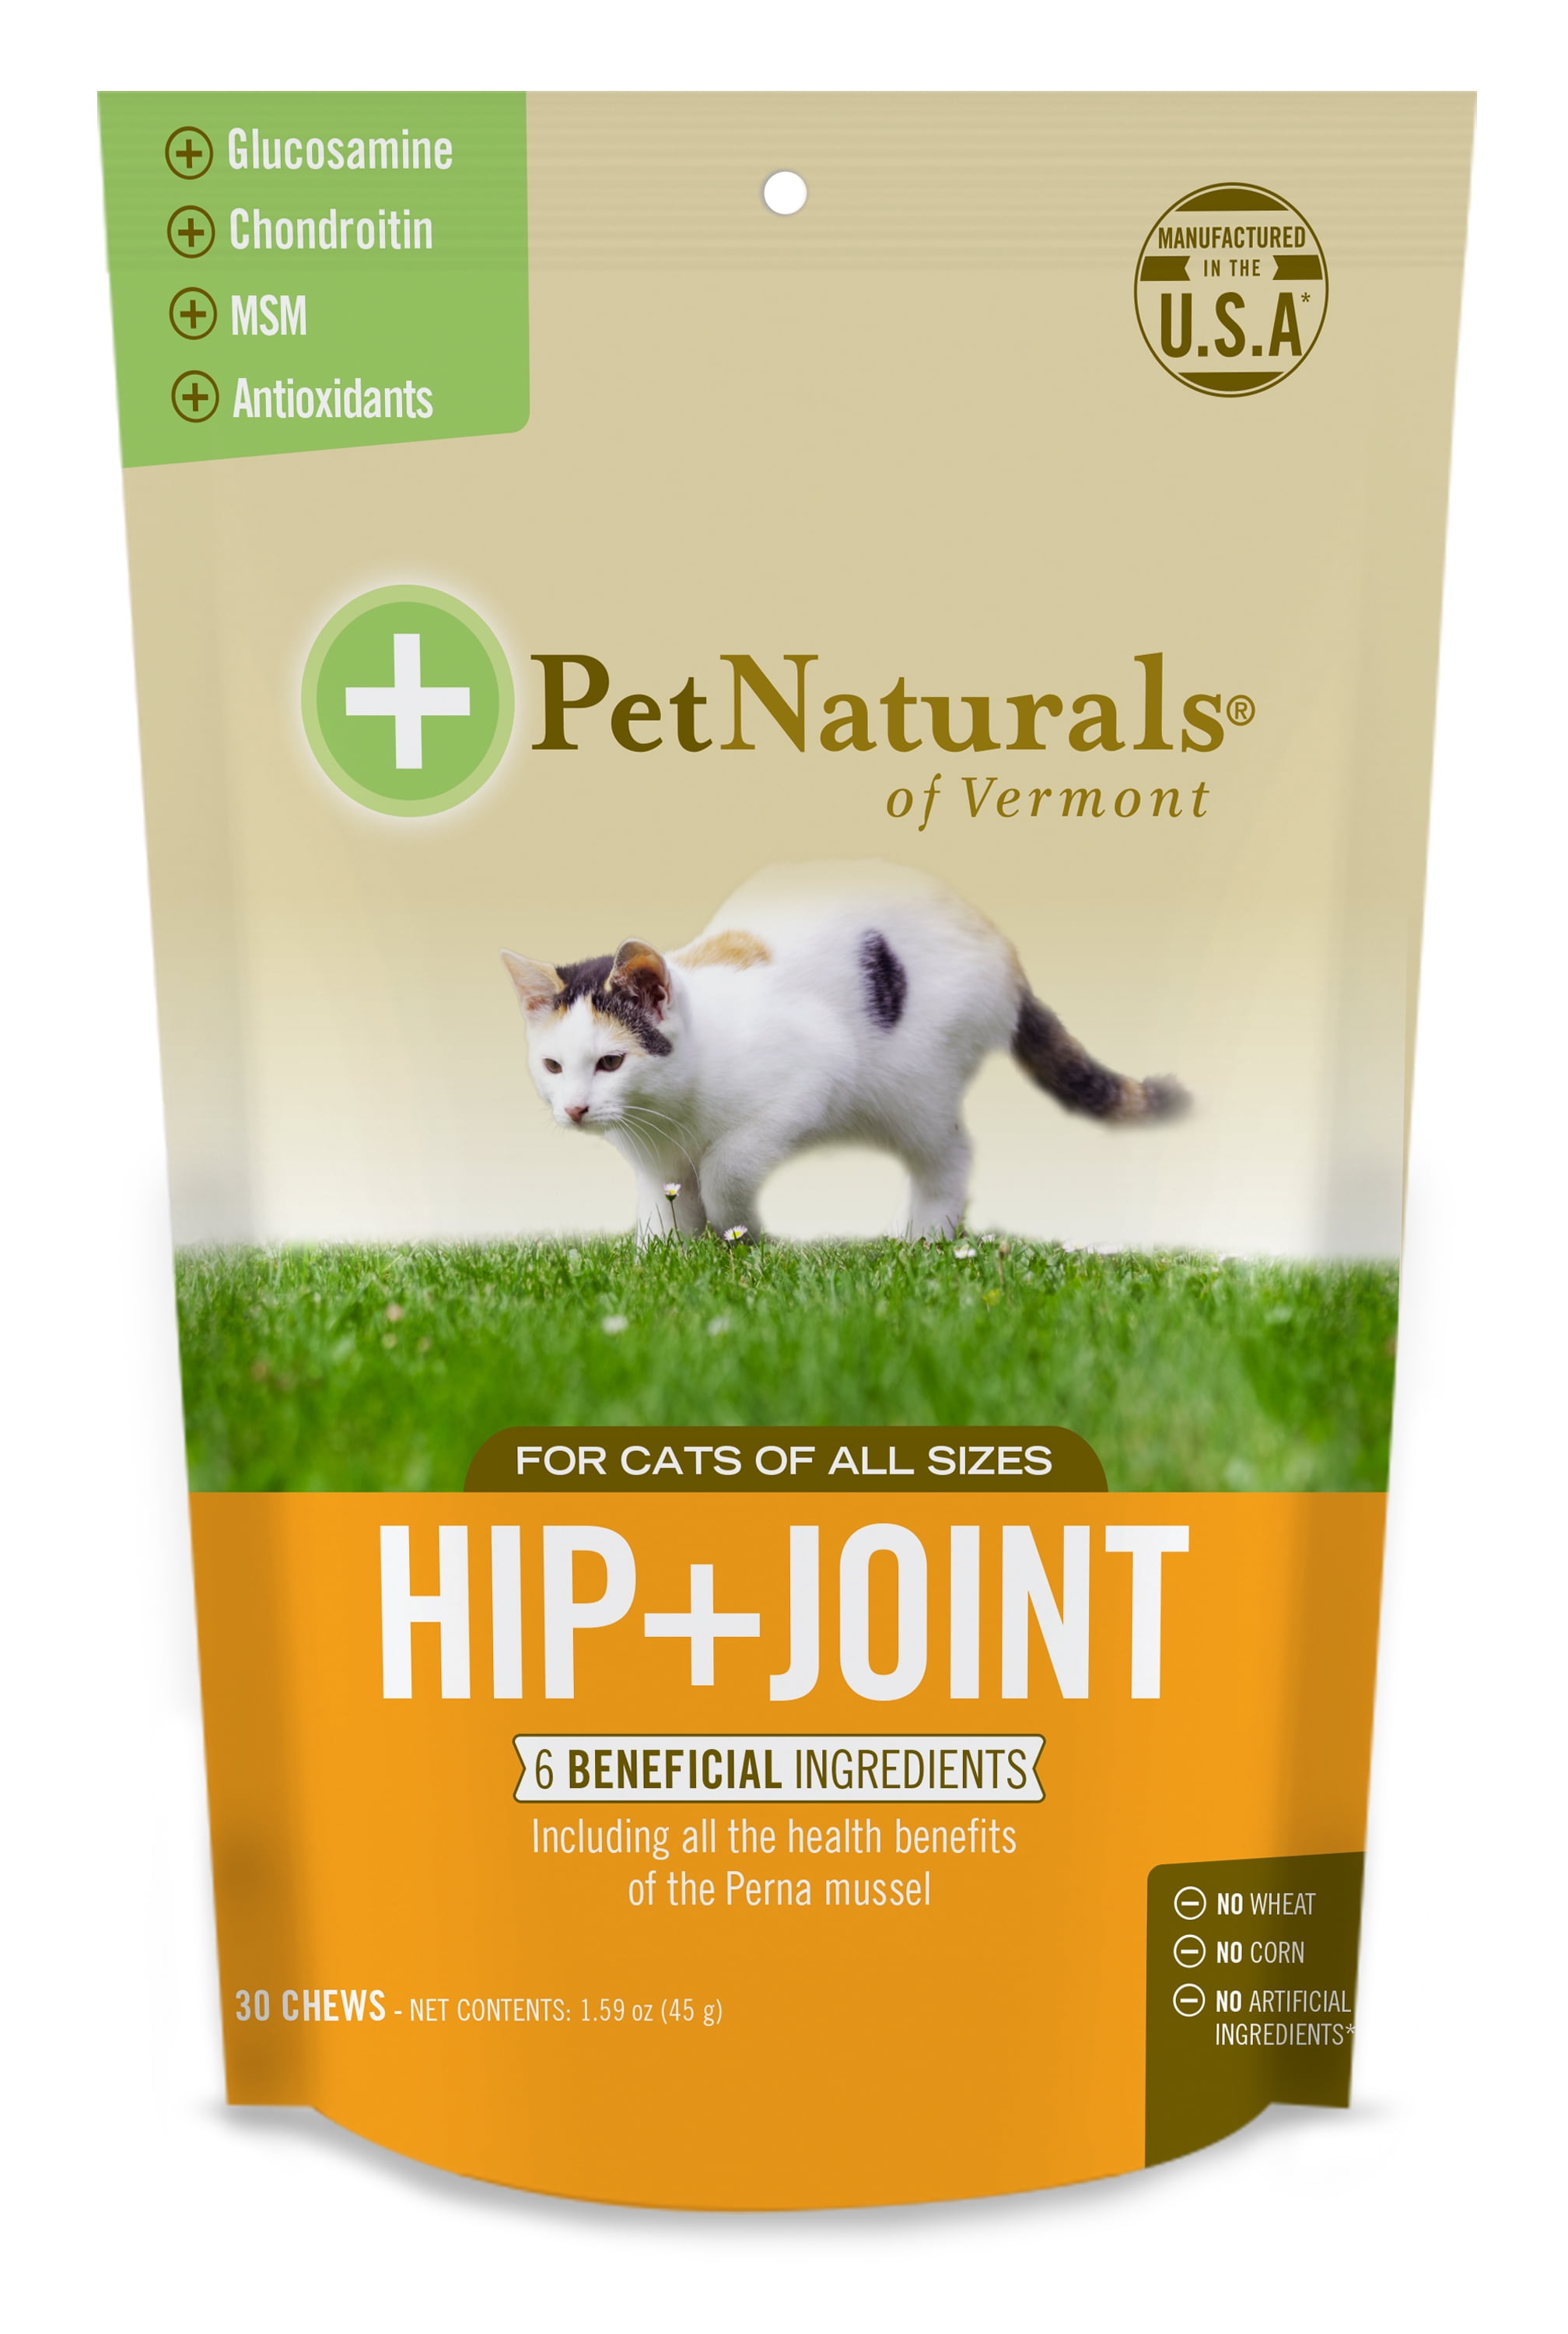 Pet Naturals of Vermont Hip + Joint for Cats, Daily Hip and Joint